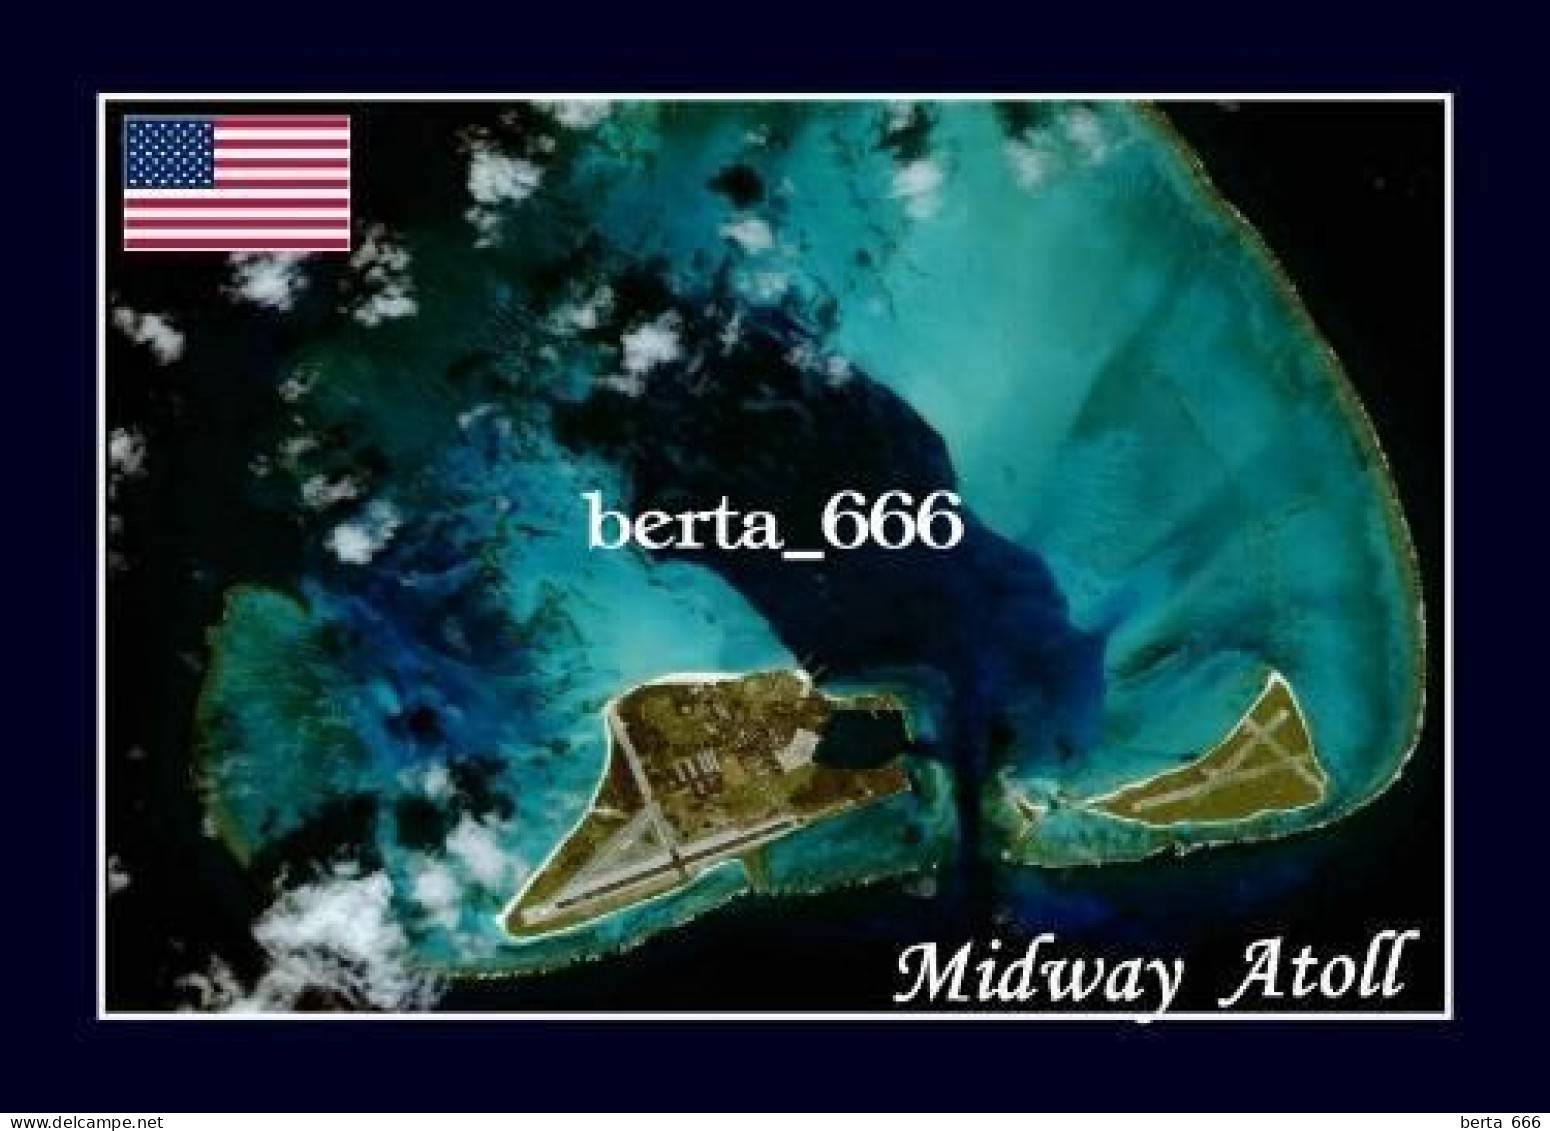 United States Midway Atoll Satellite View New Postcard - Islas Midway